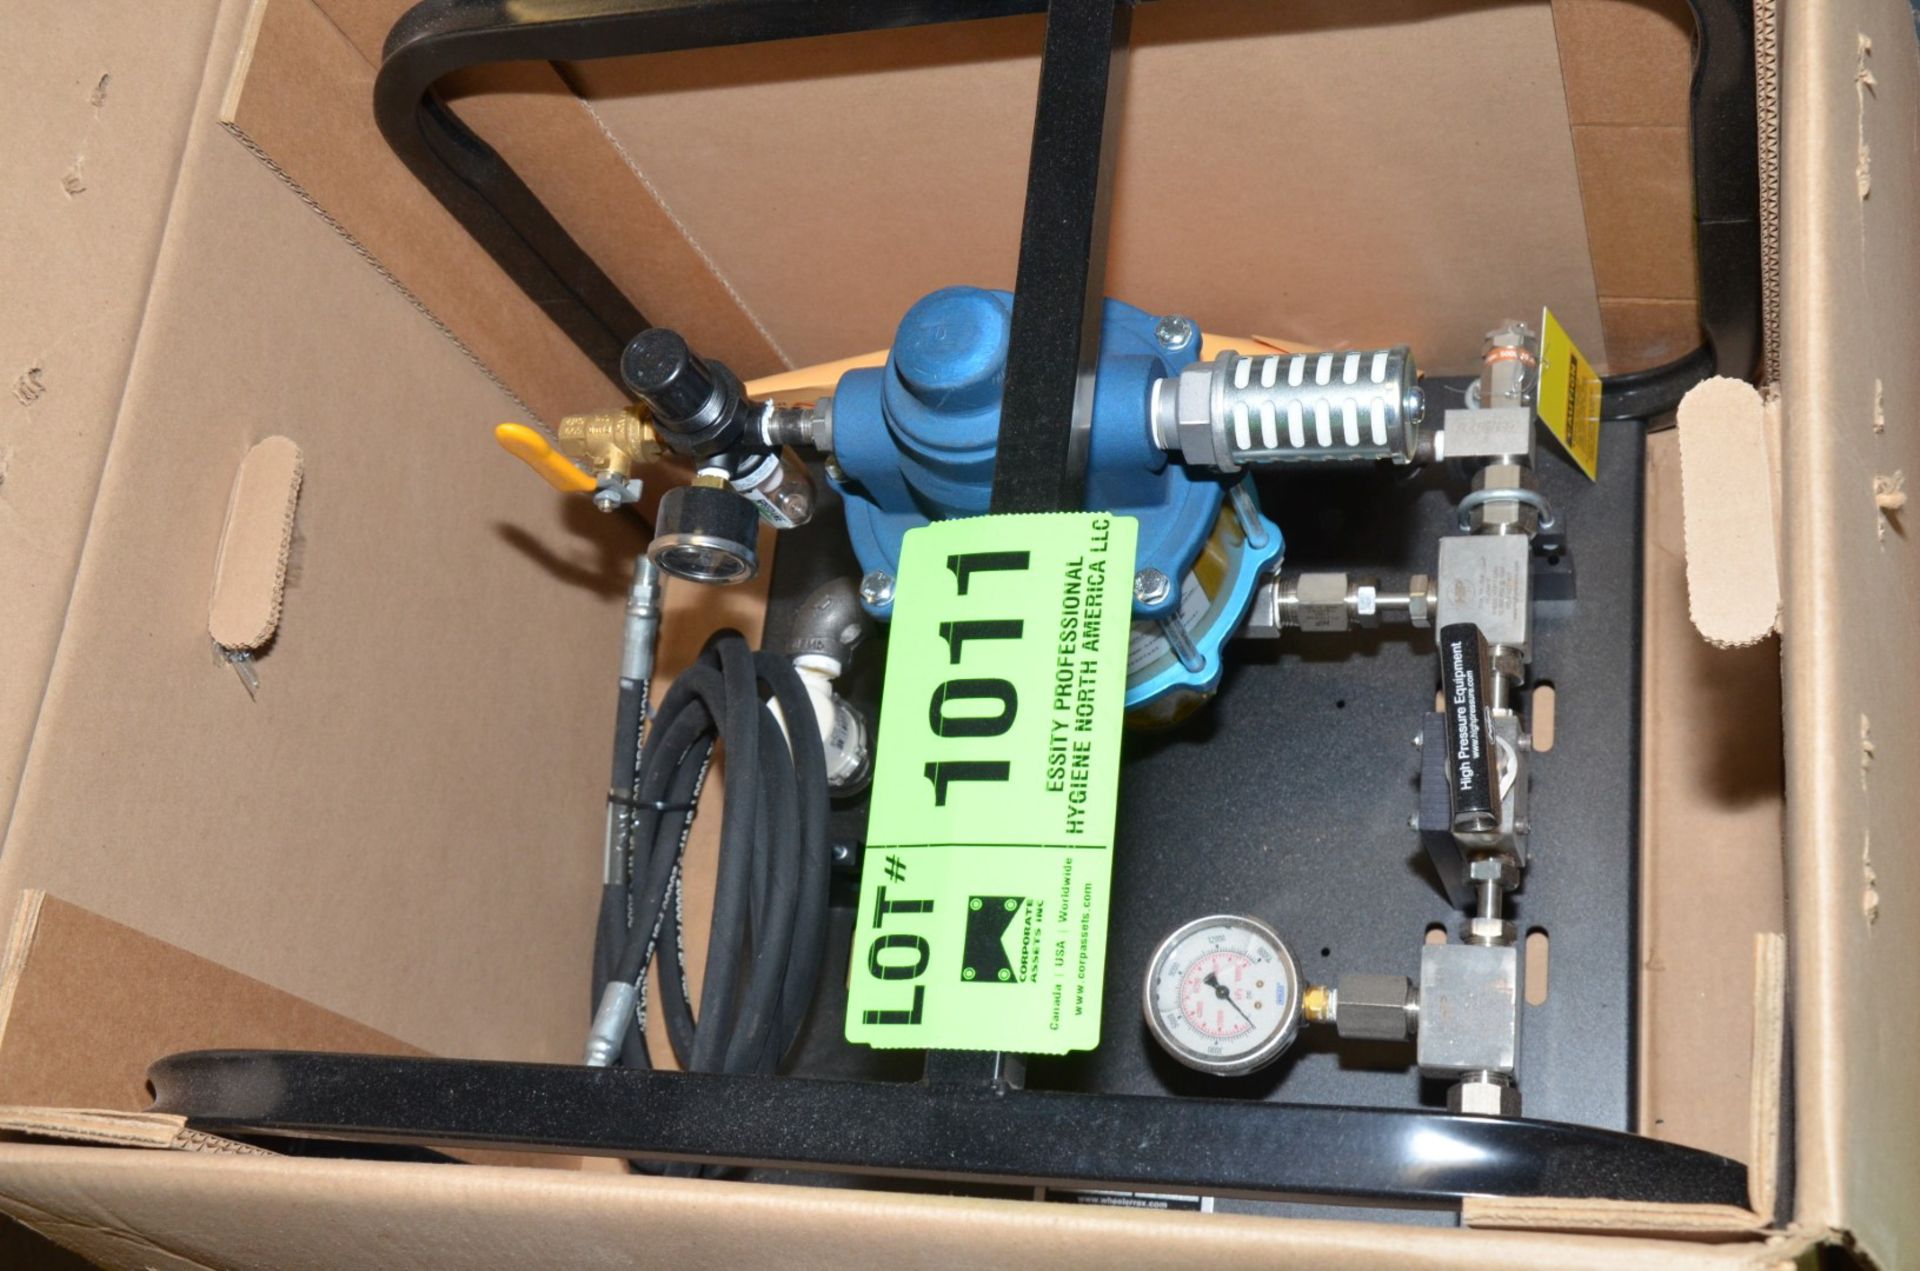 WHEELER REX 32450 HYDROSTATIC TEST PUMP WITH 10,000 PSI CAPACITY, 0.088 GPM, S/N 16157 [RIGGING - Image 2 of 3